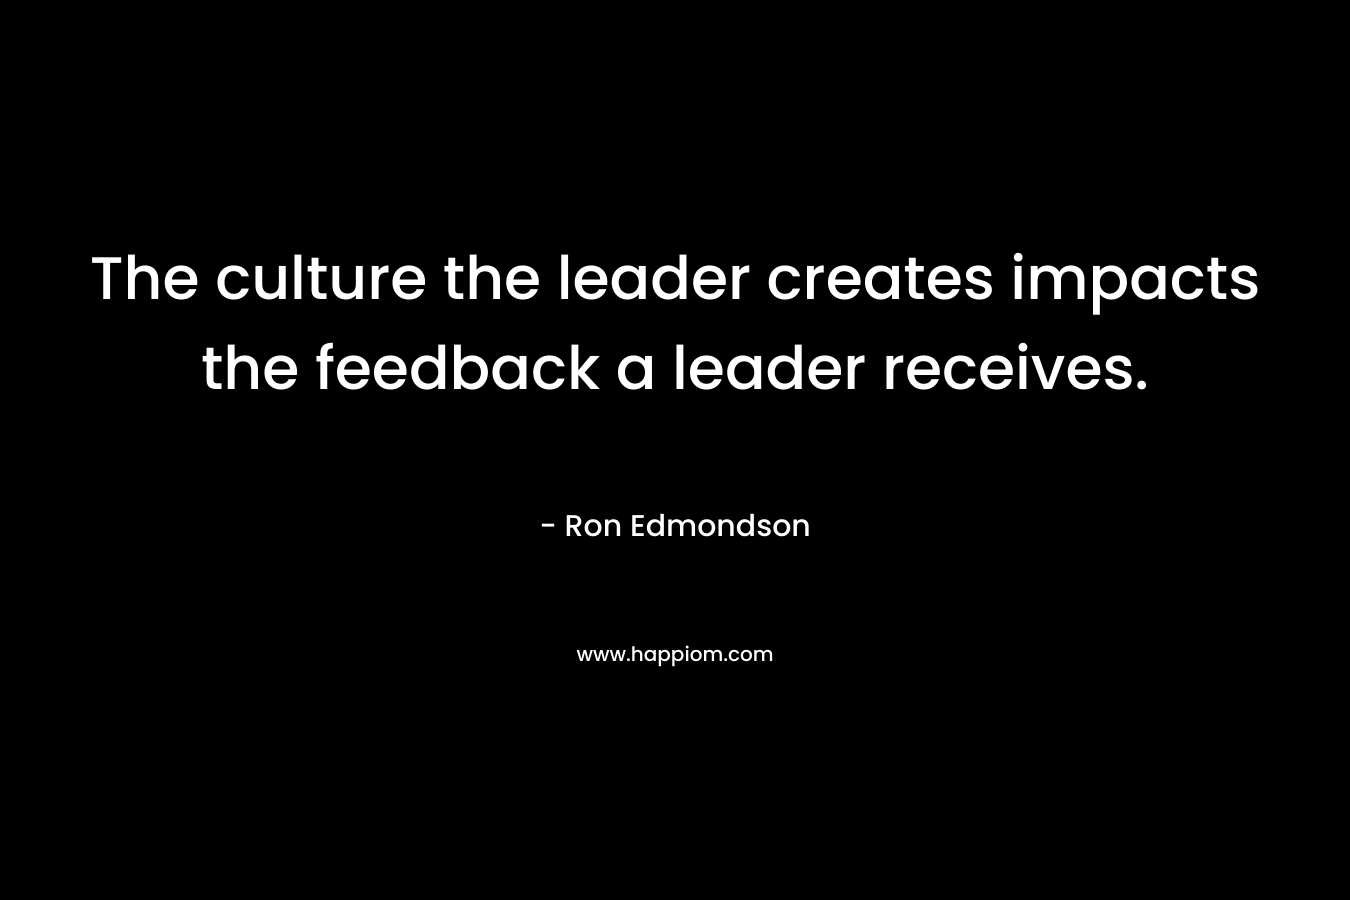 The culture the leader creates impacts the feedback a leader receives. – Ron Edmondson